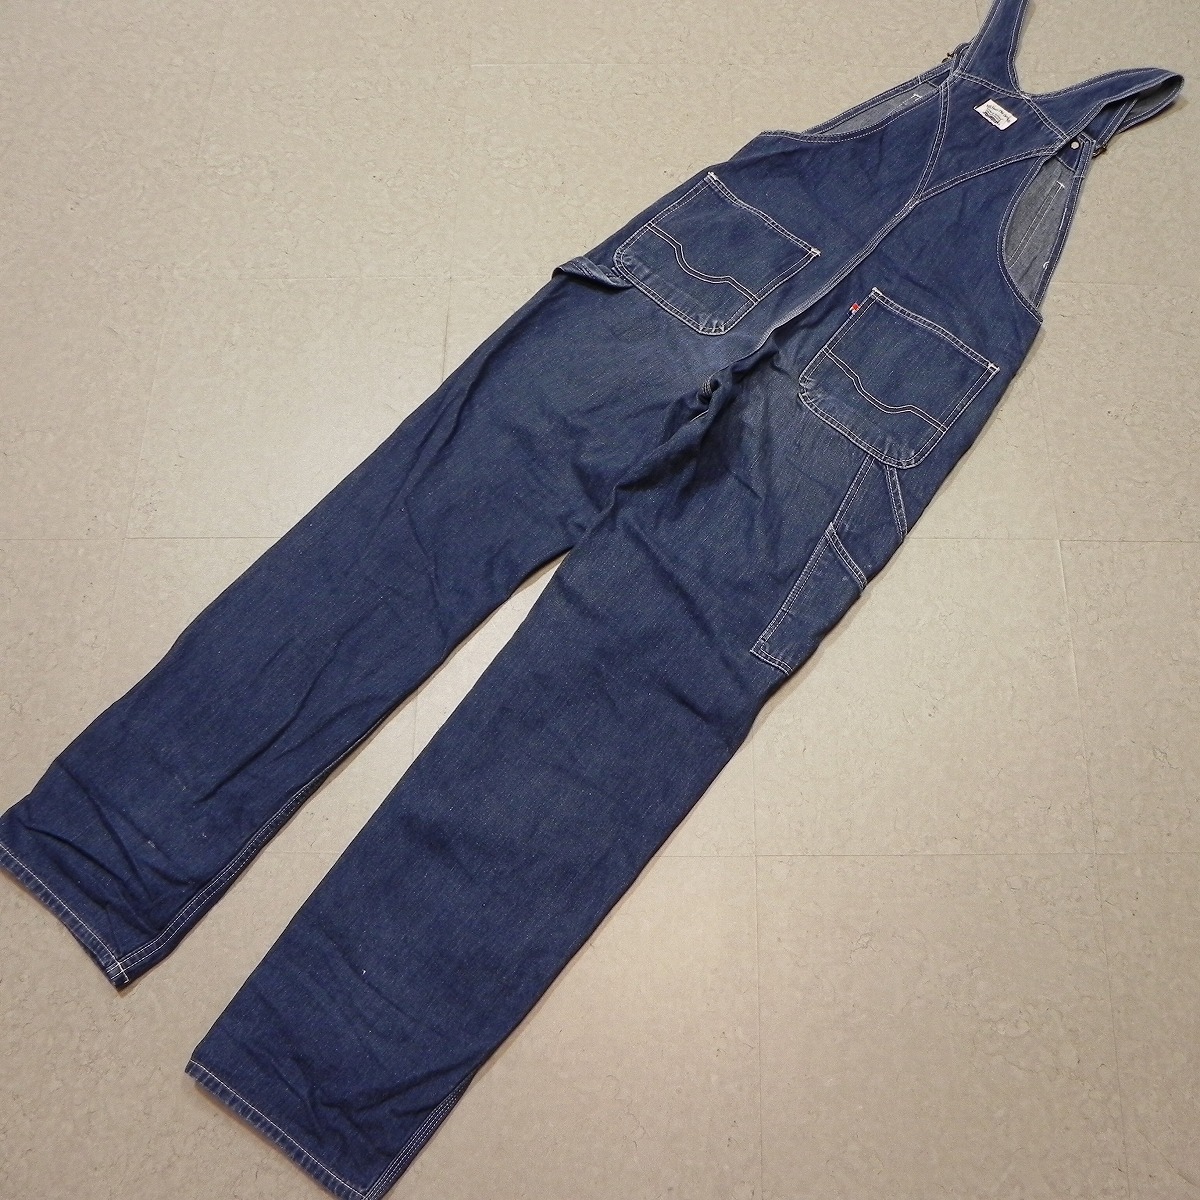 -28* Vintage 70s 80s[JOHN BULL] the first period Johnbull Denim overall W28 old clothes retro that time thing *